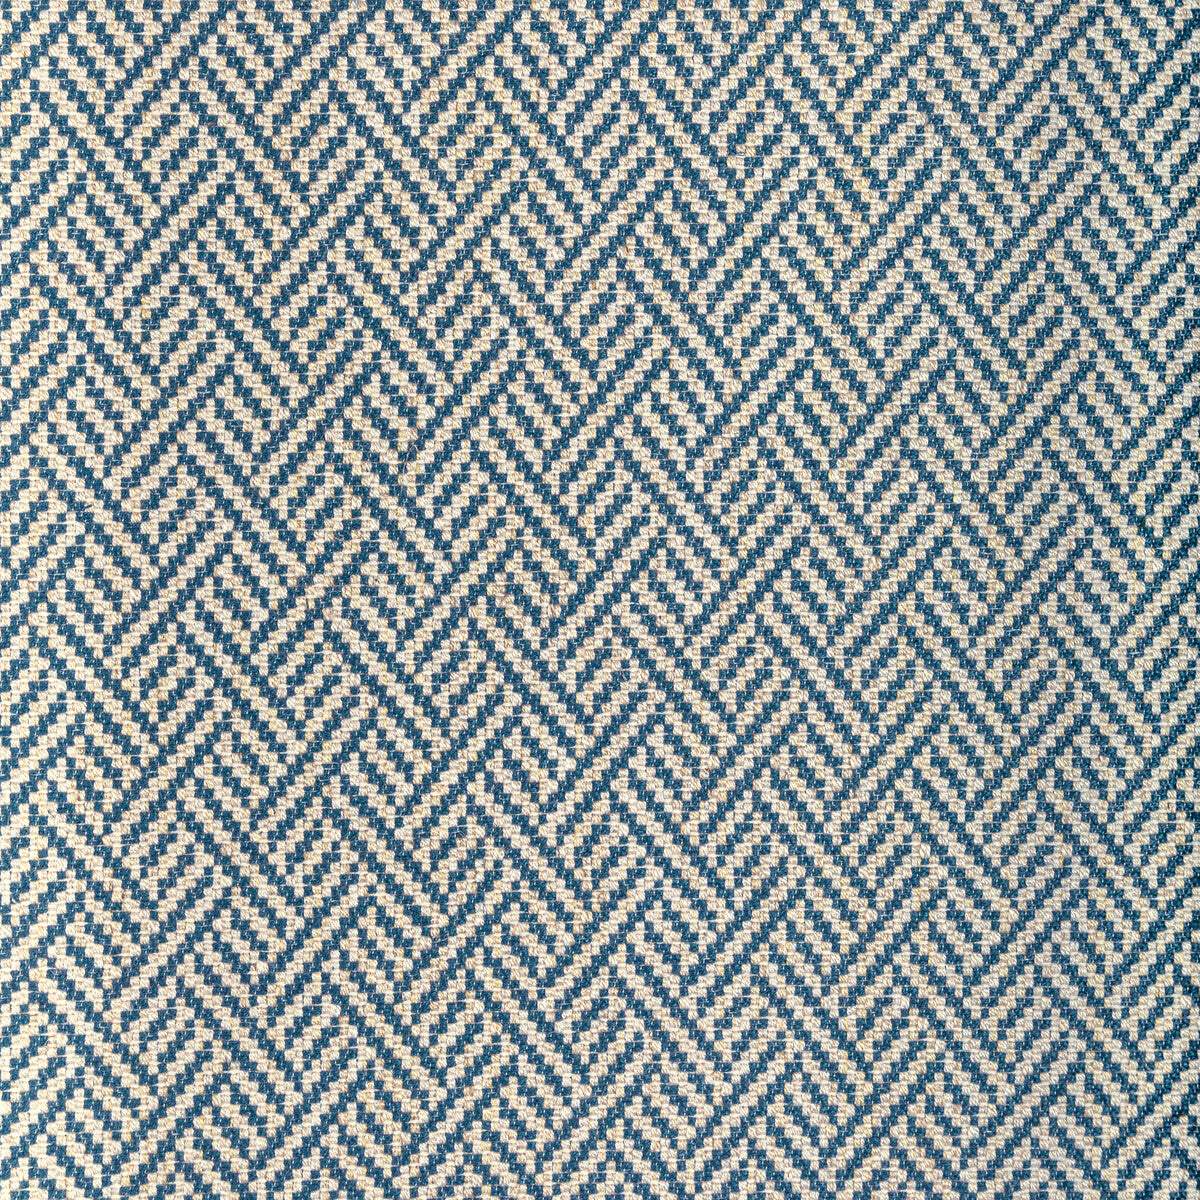 Colbert Weave fabric in blue color - pattern 8022108.5.0 - by Brunschwig &amp; Fils in the Lorient Weaves collection